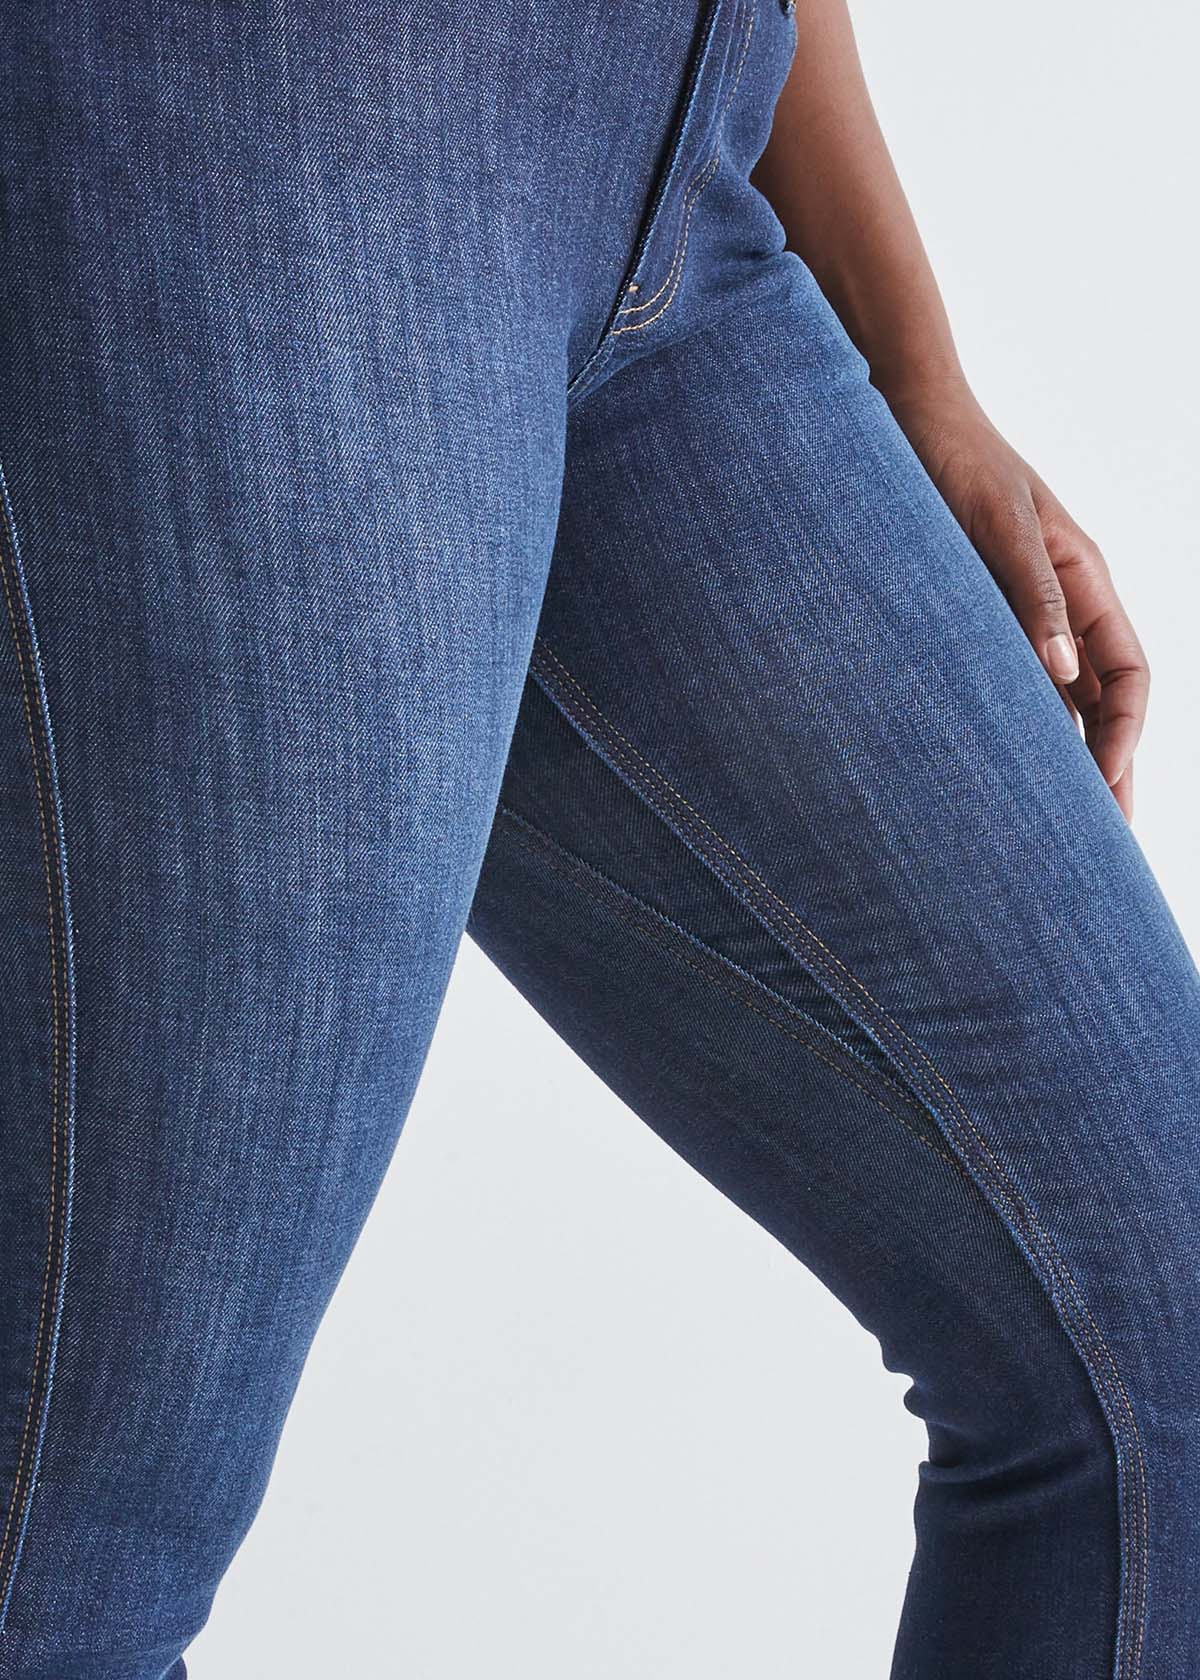 High Rise Super Flare Jeans by LEE for $30